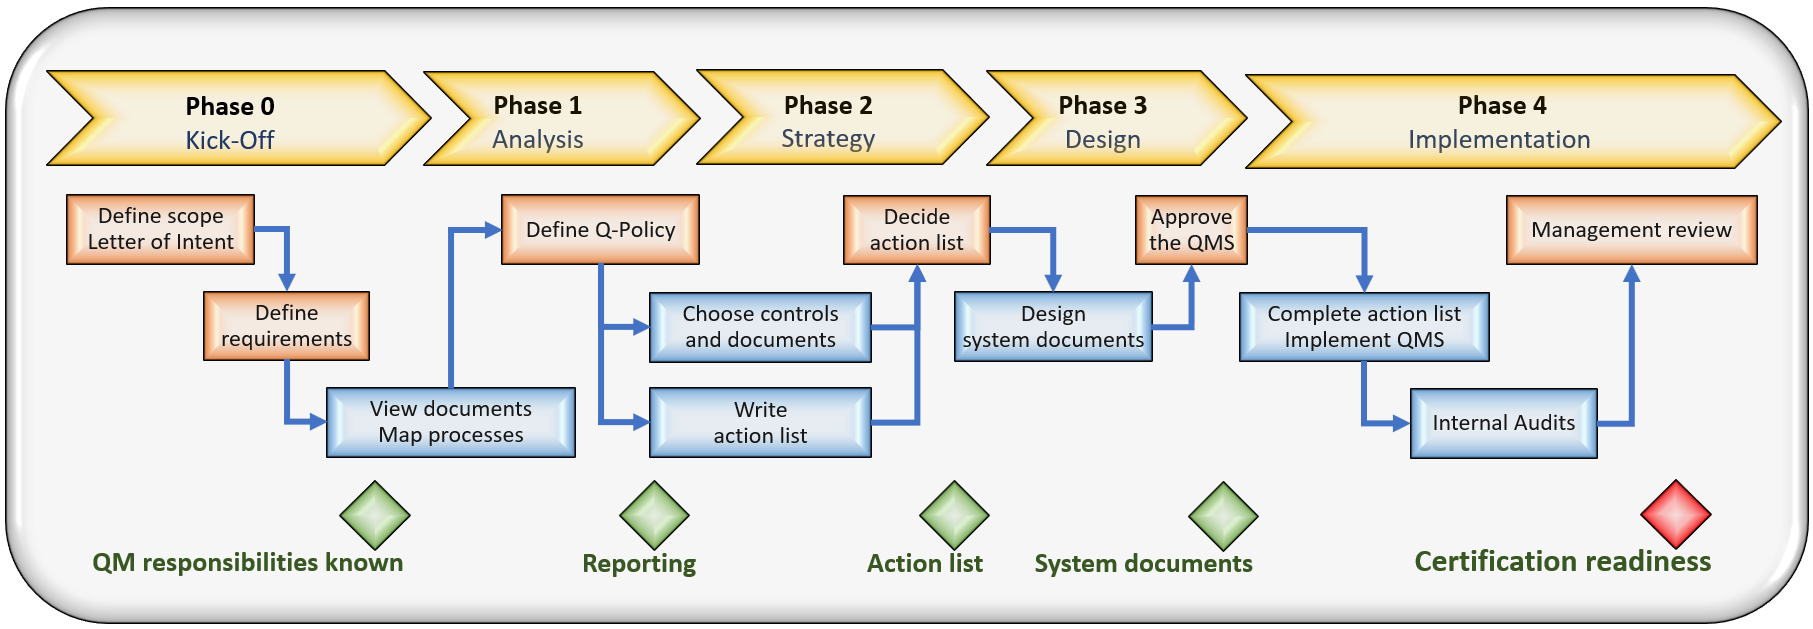 Image: Process flow - Implementation of a quality management system.